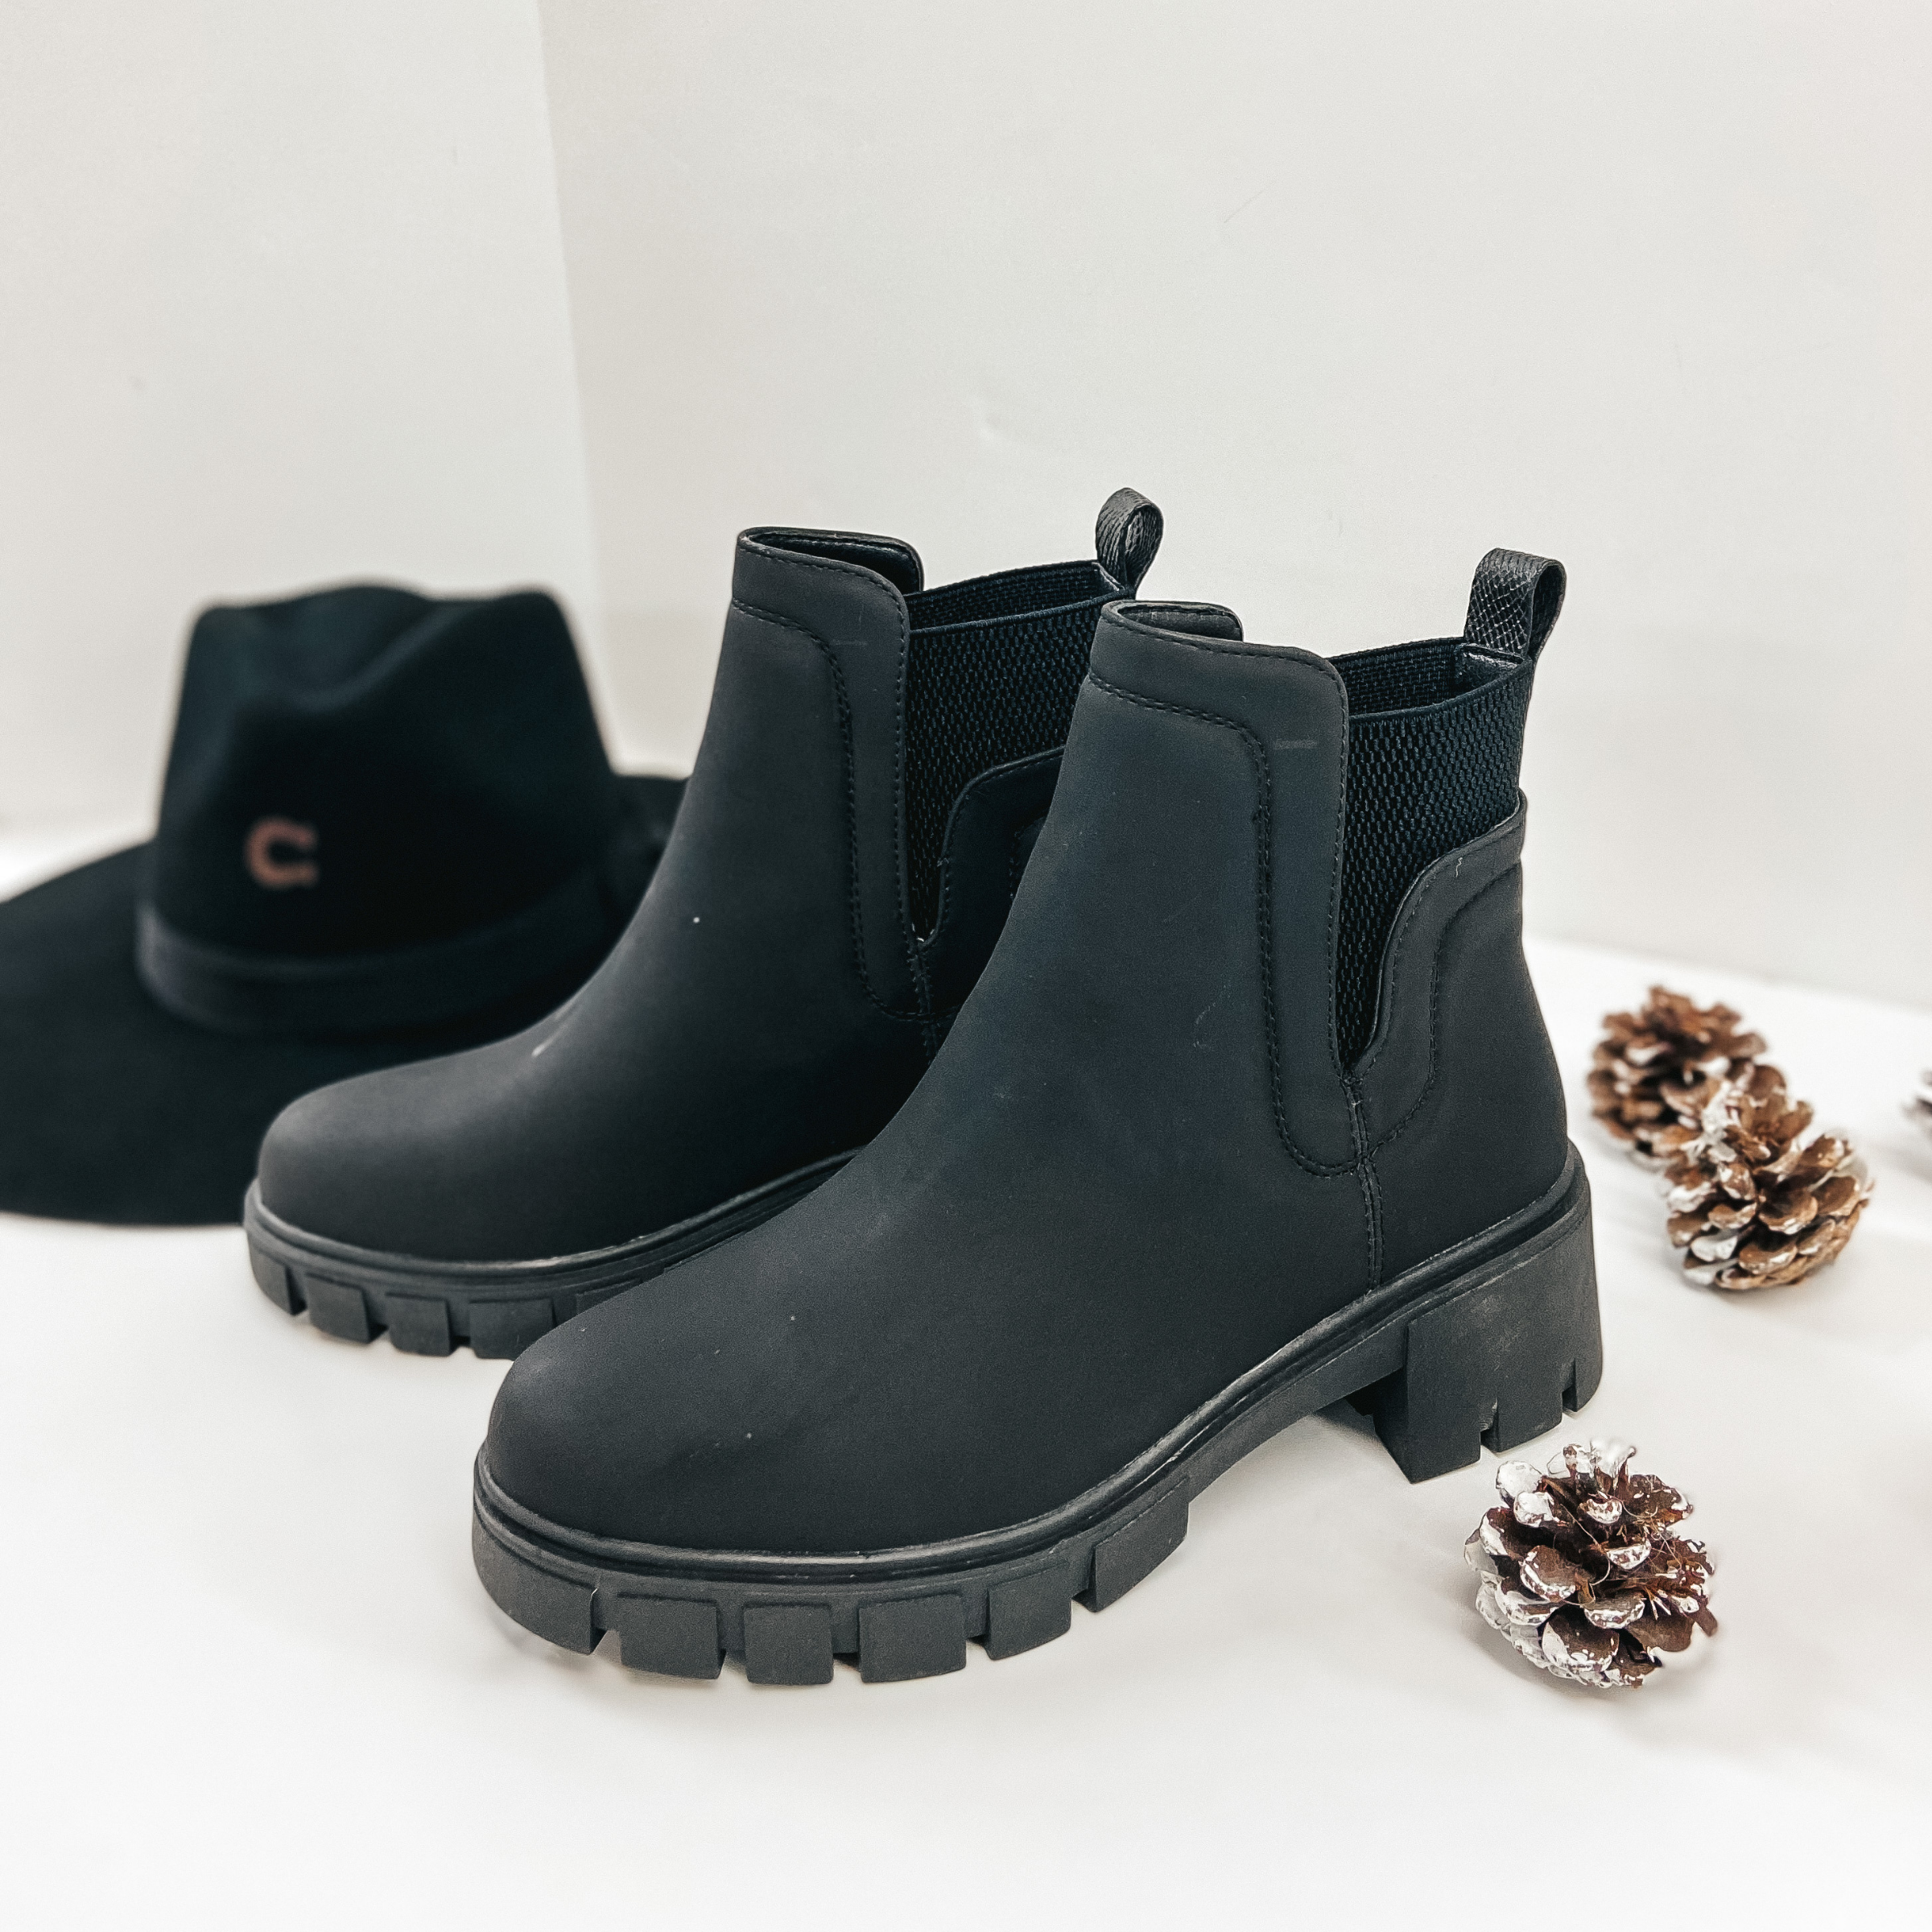 Season Premiere Slip On Chunky Heel Booties in Black - Giddy Up Glamour Boutique